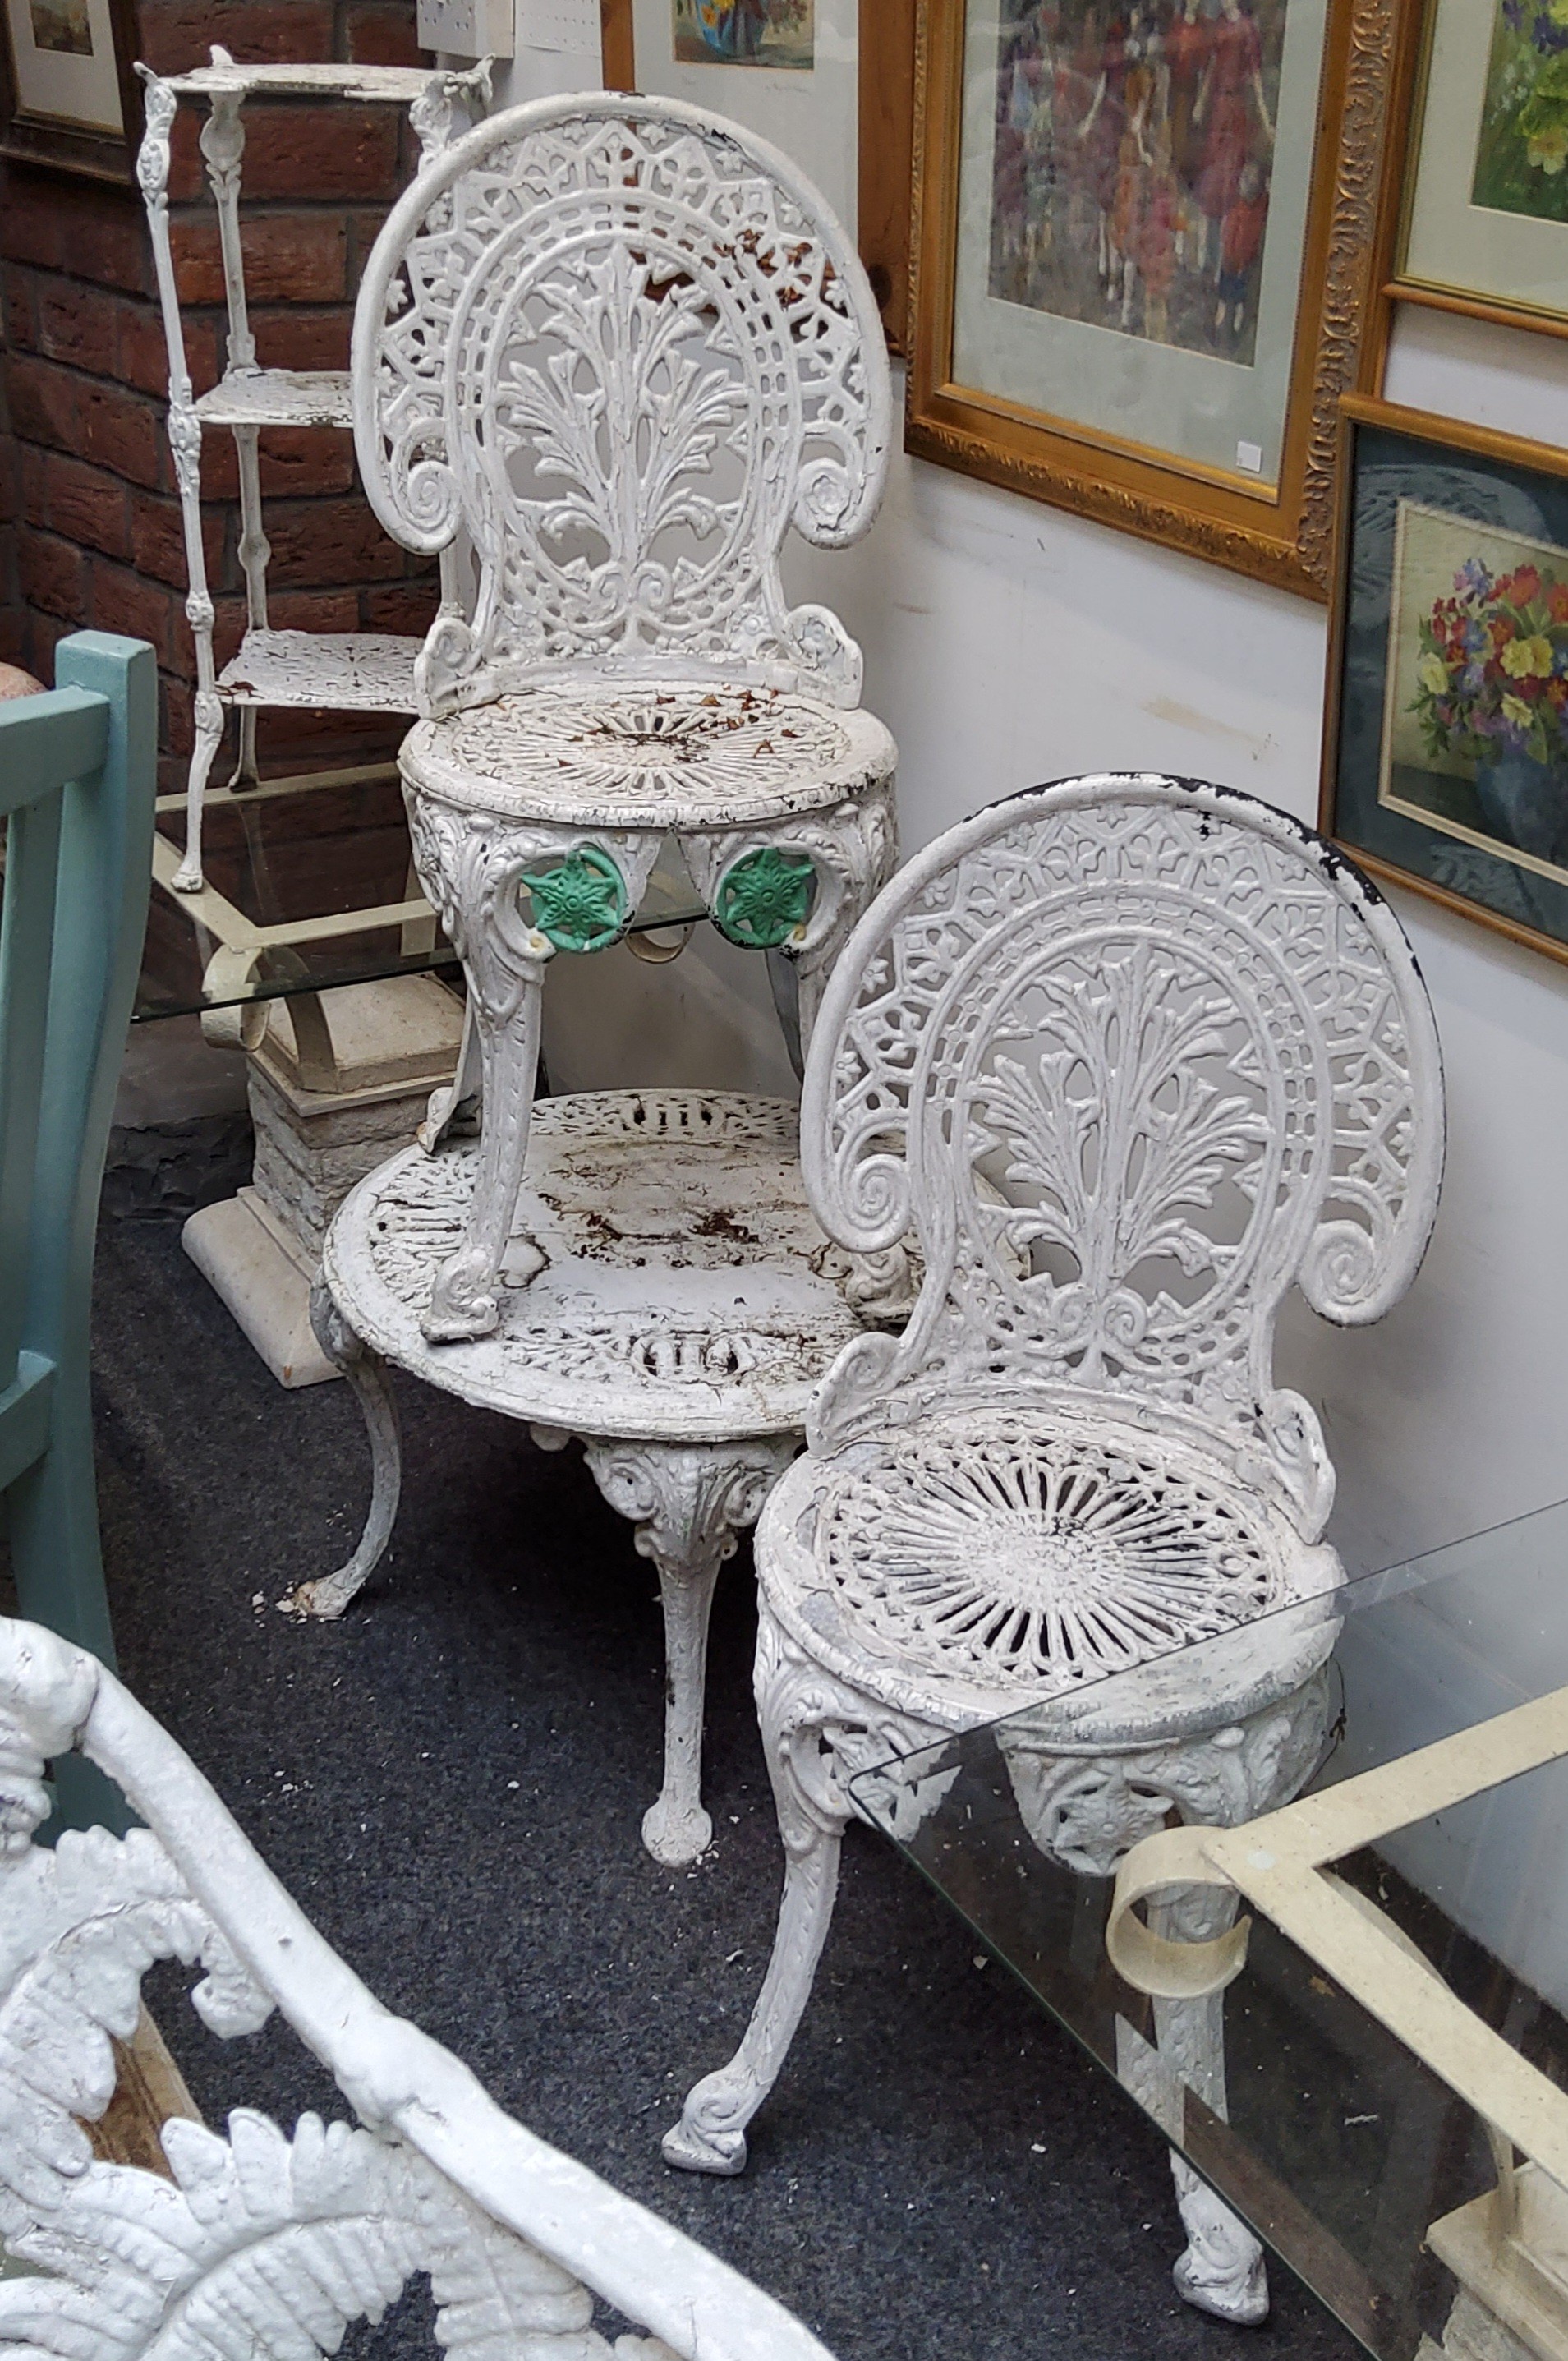 A pair of Coalbrookdale style garden seats, coffee table and three tier cake stand, painted with